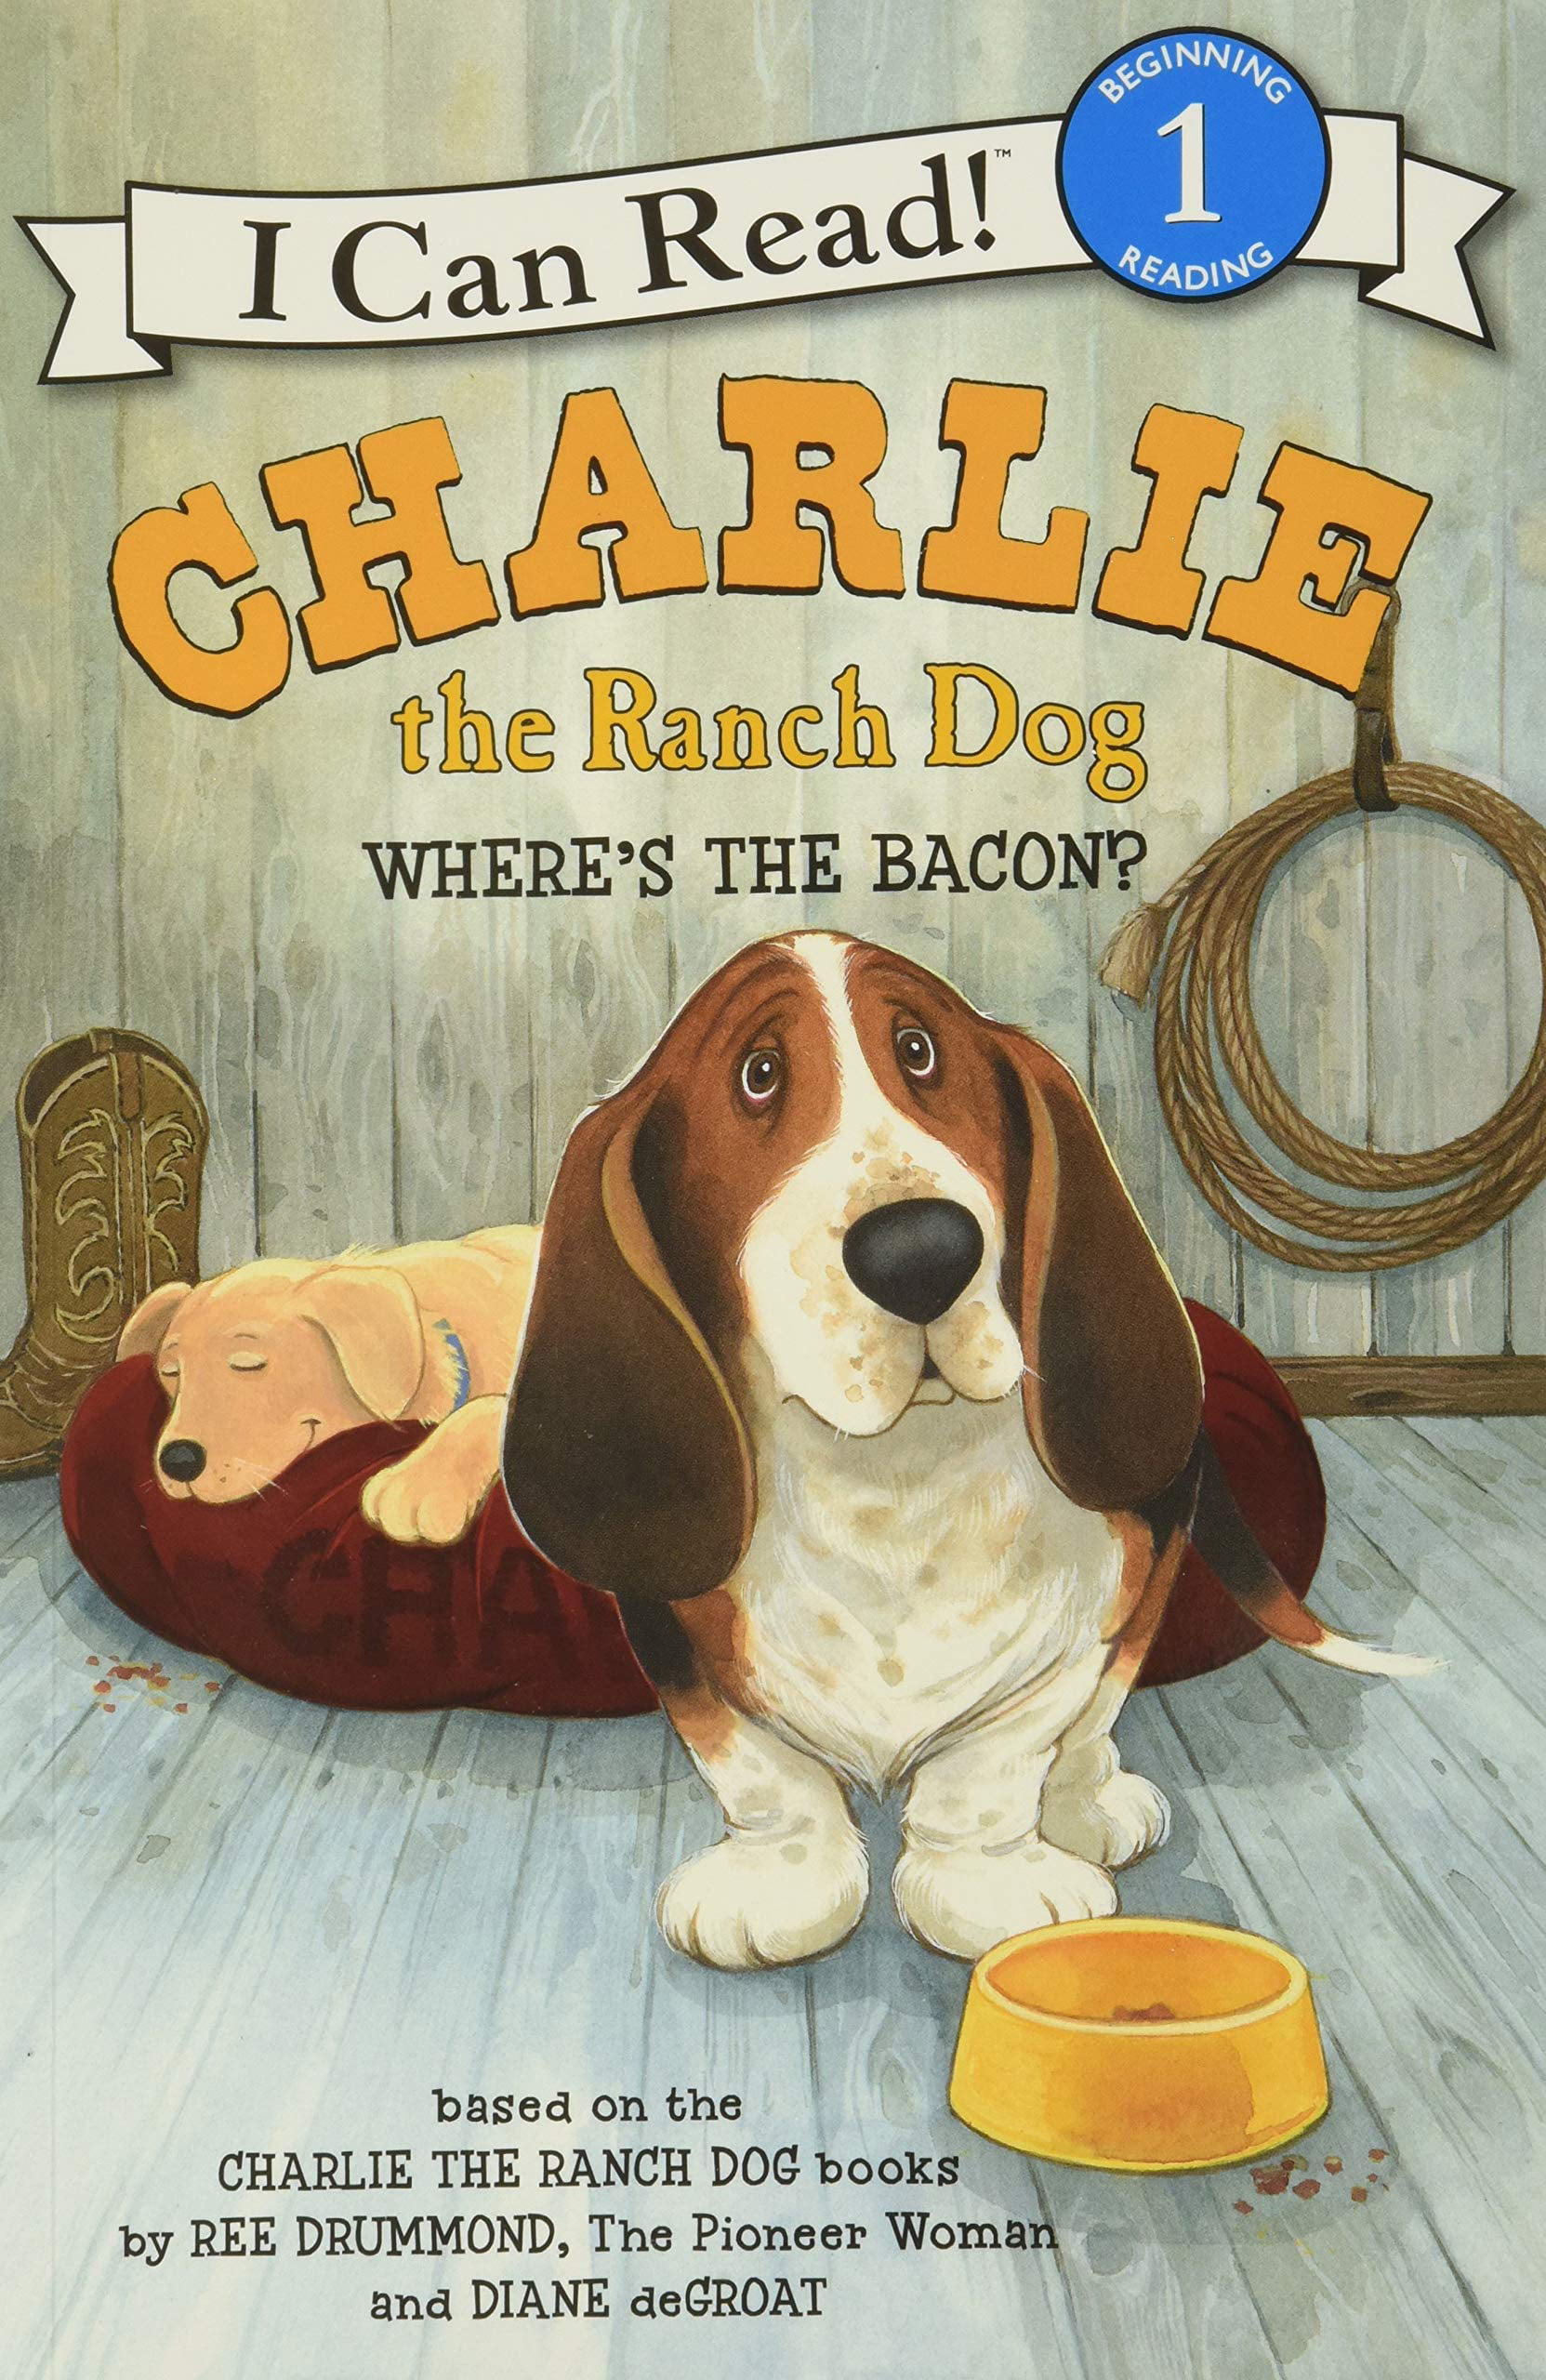 Charlie the Ranch Dog: Where's the Bacon? (Paperback) - Walmart.com